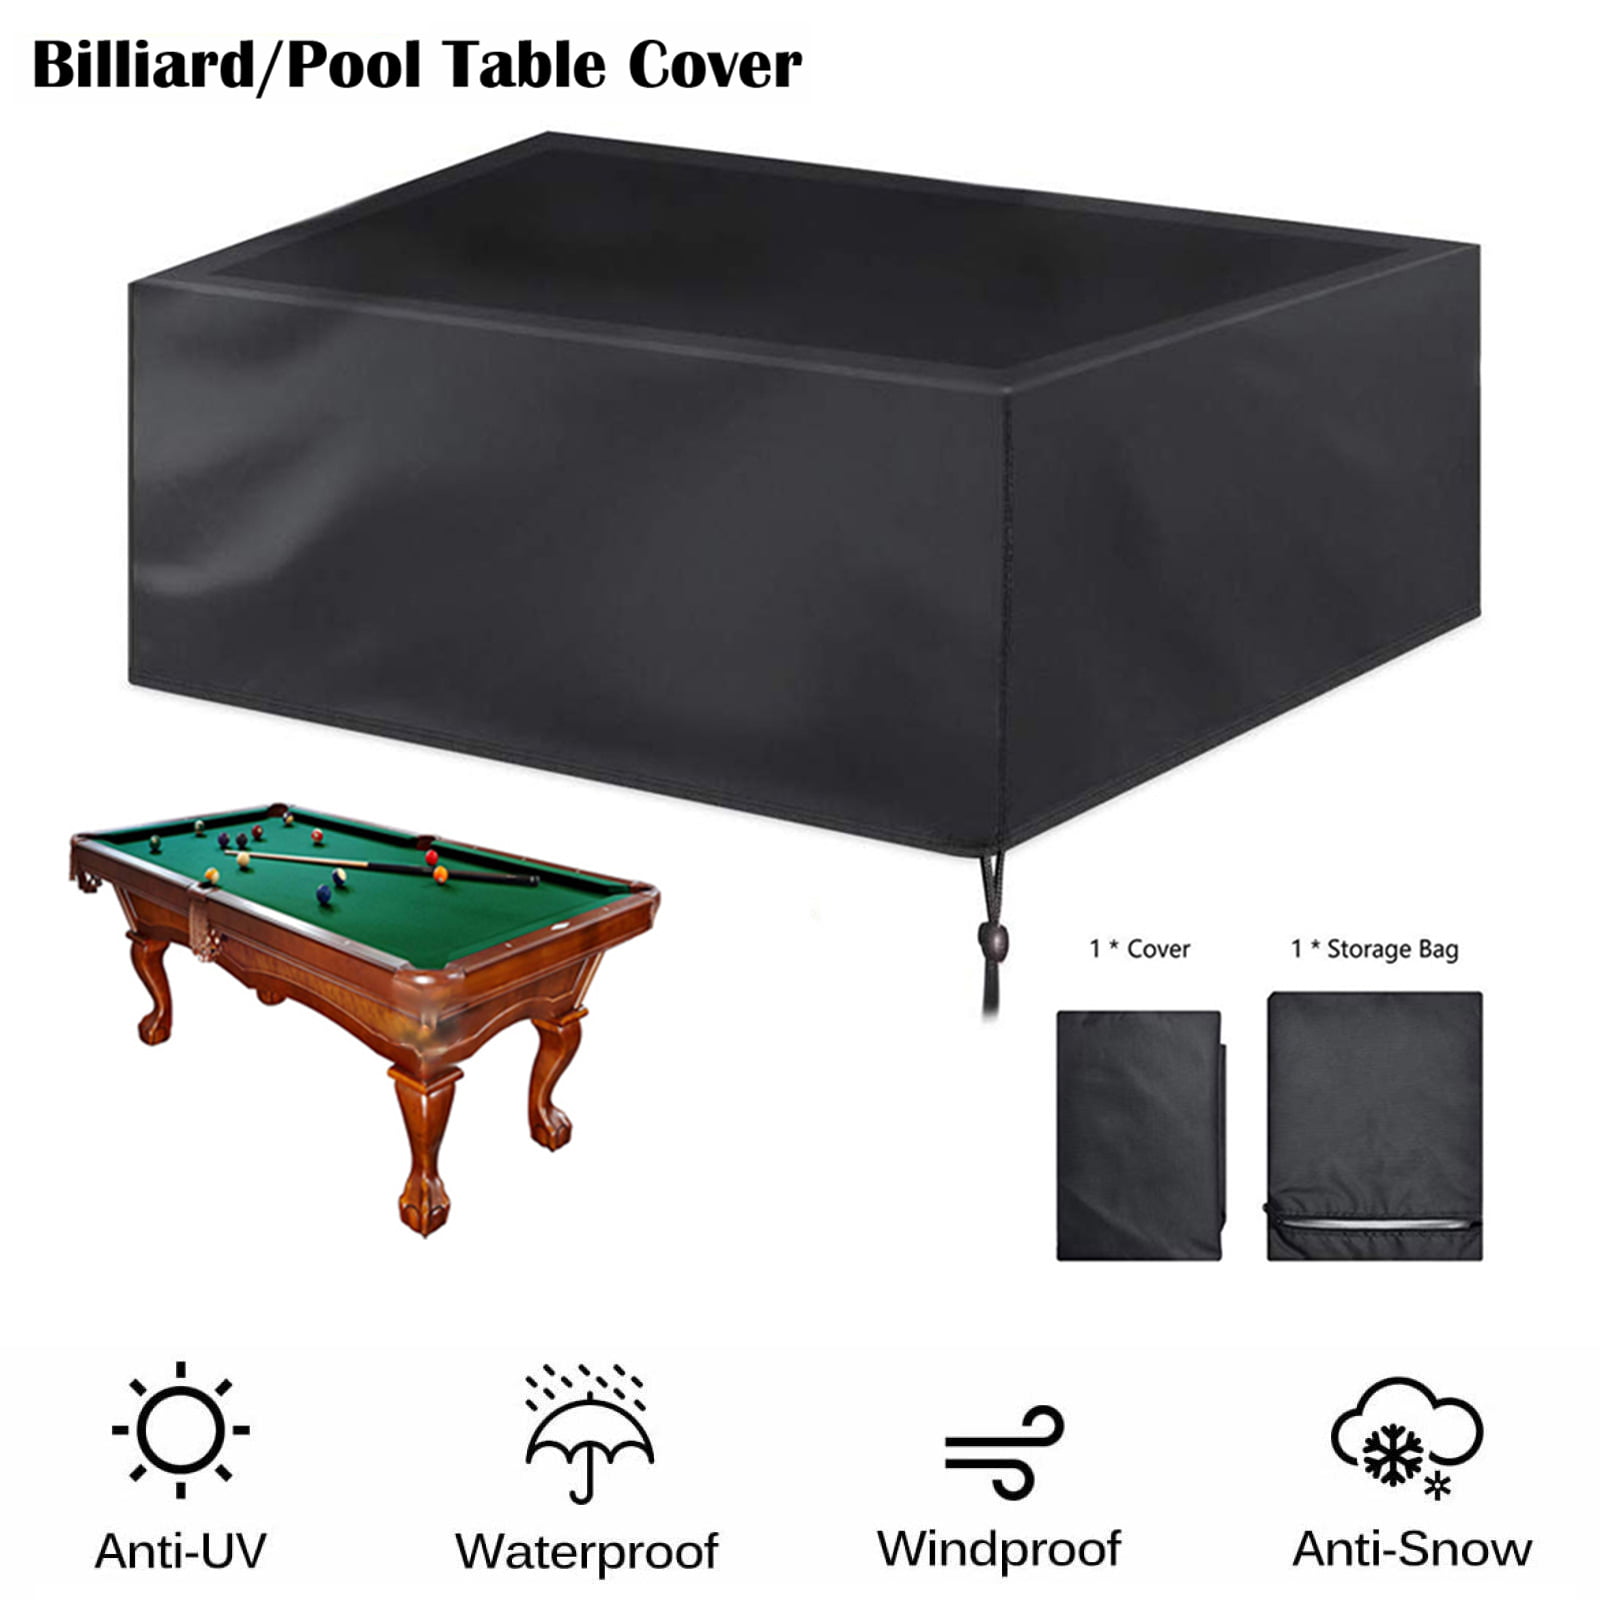 Iszy Billiards 8 Foot Heavy Duty Fitted Leatherette Pool Table Billiard Cover for sale online 